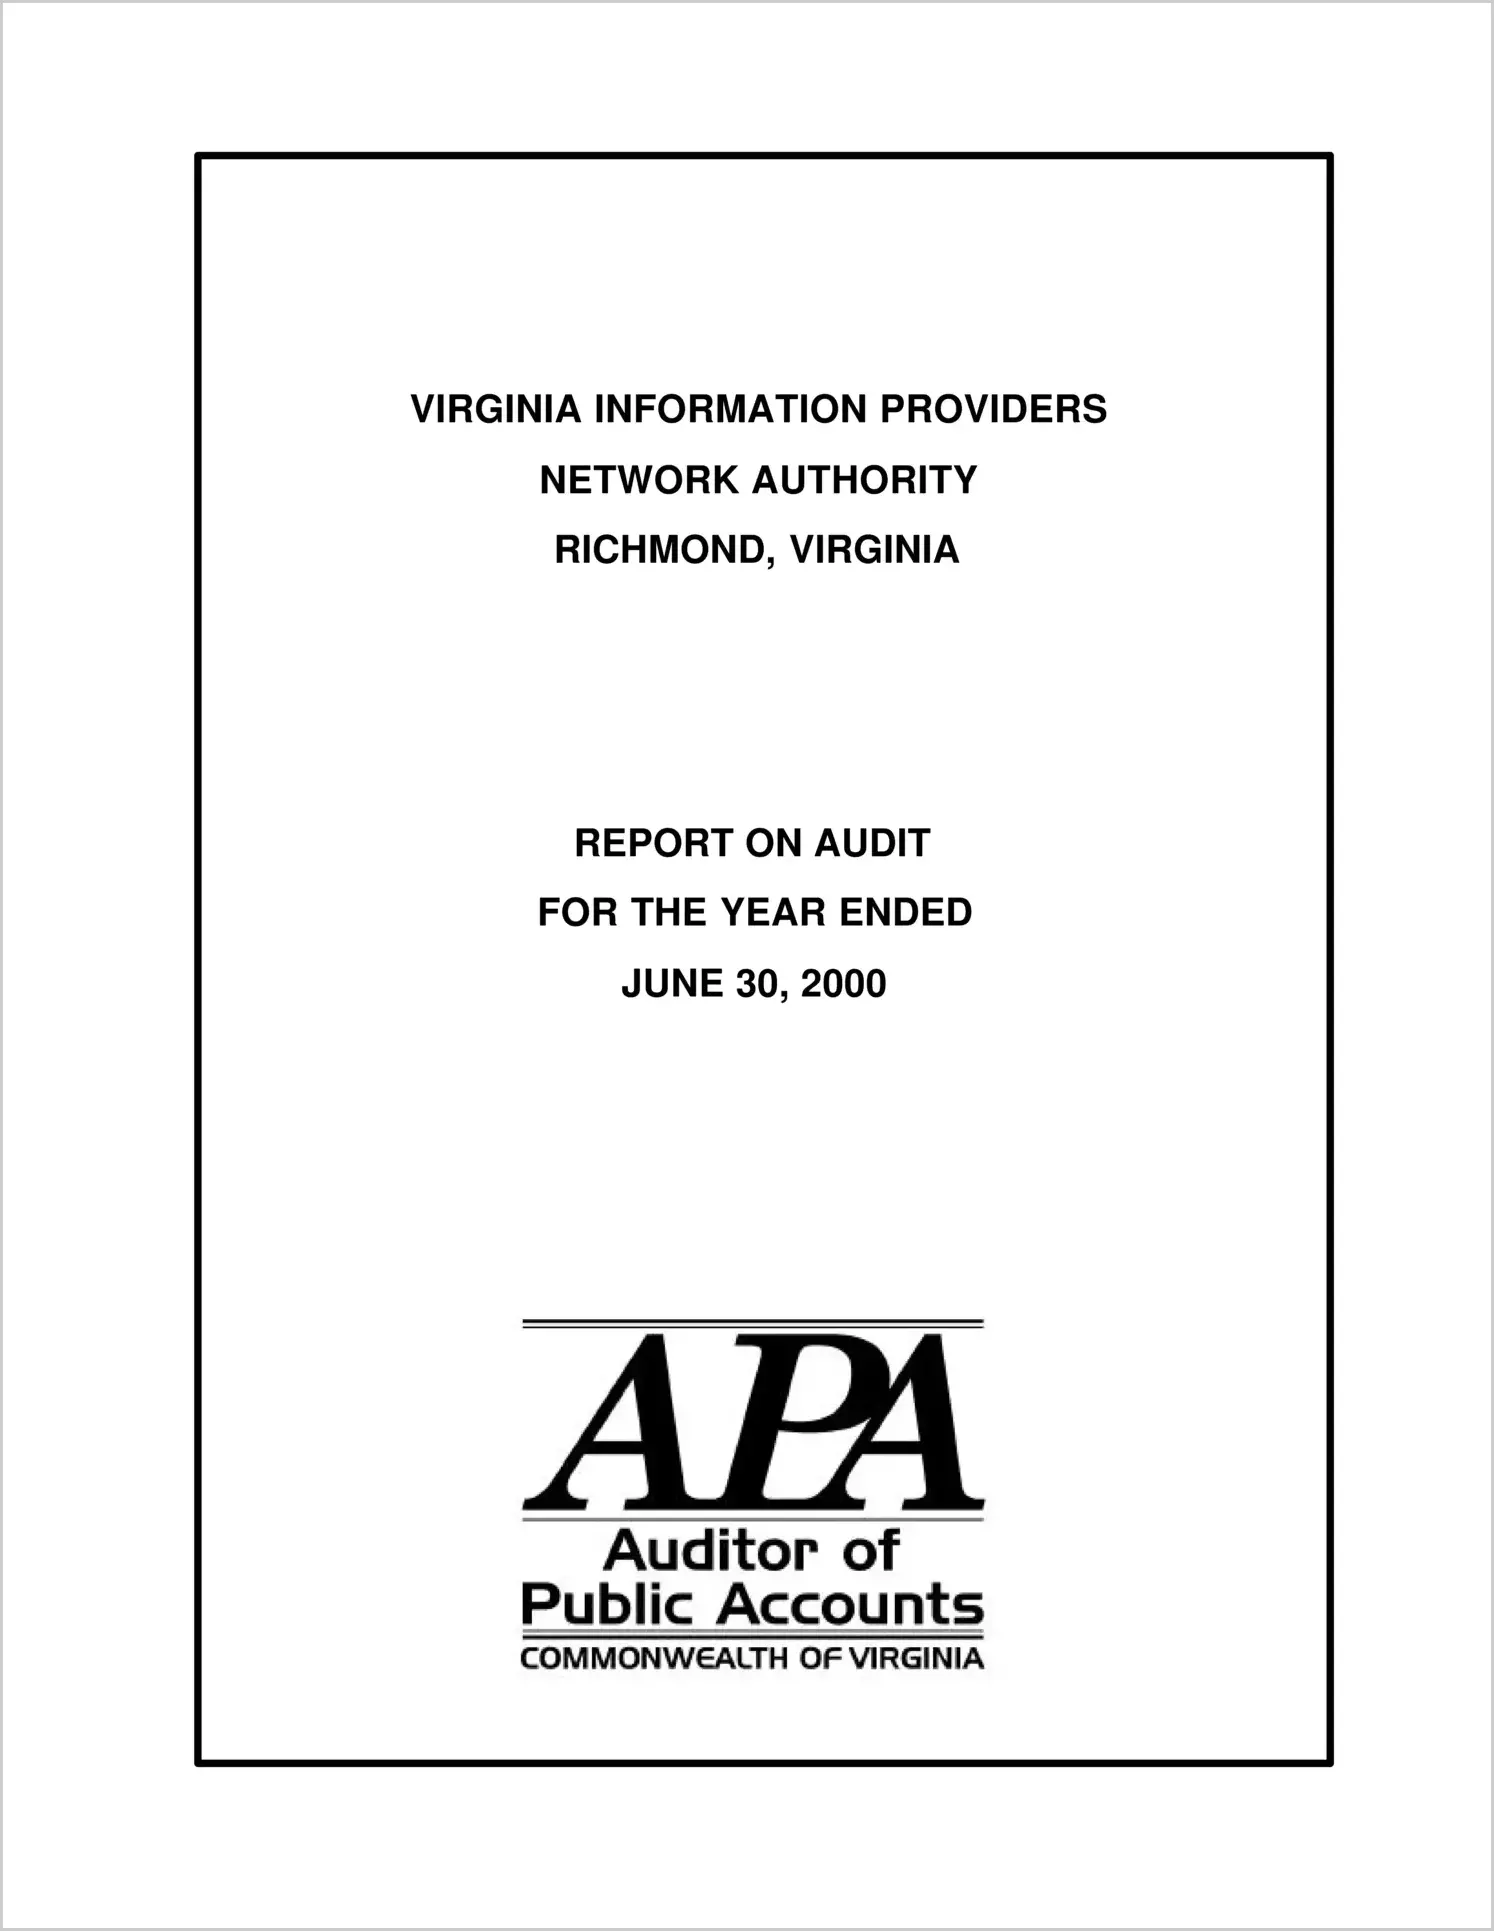 Virginia Information Providers Network Authority for the year ended June 30, 2000